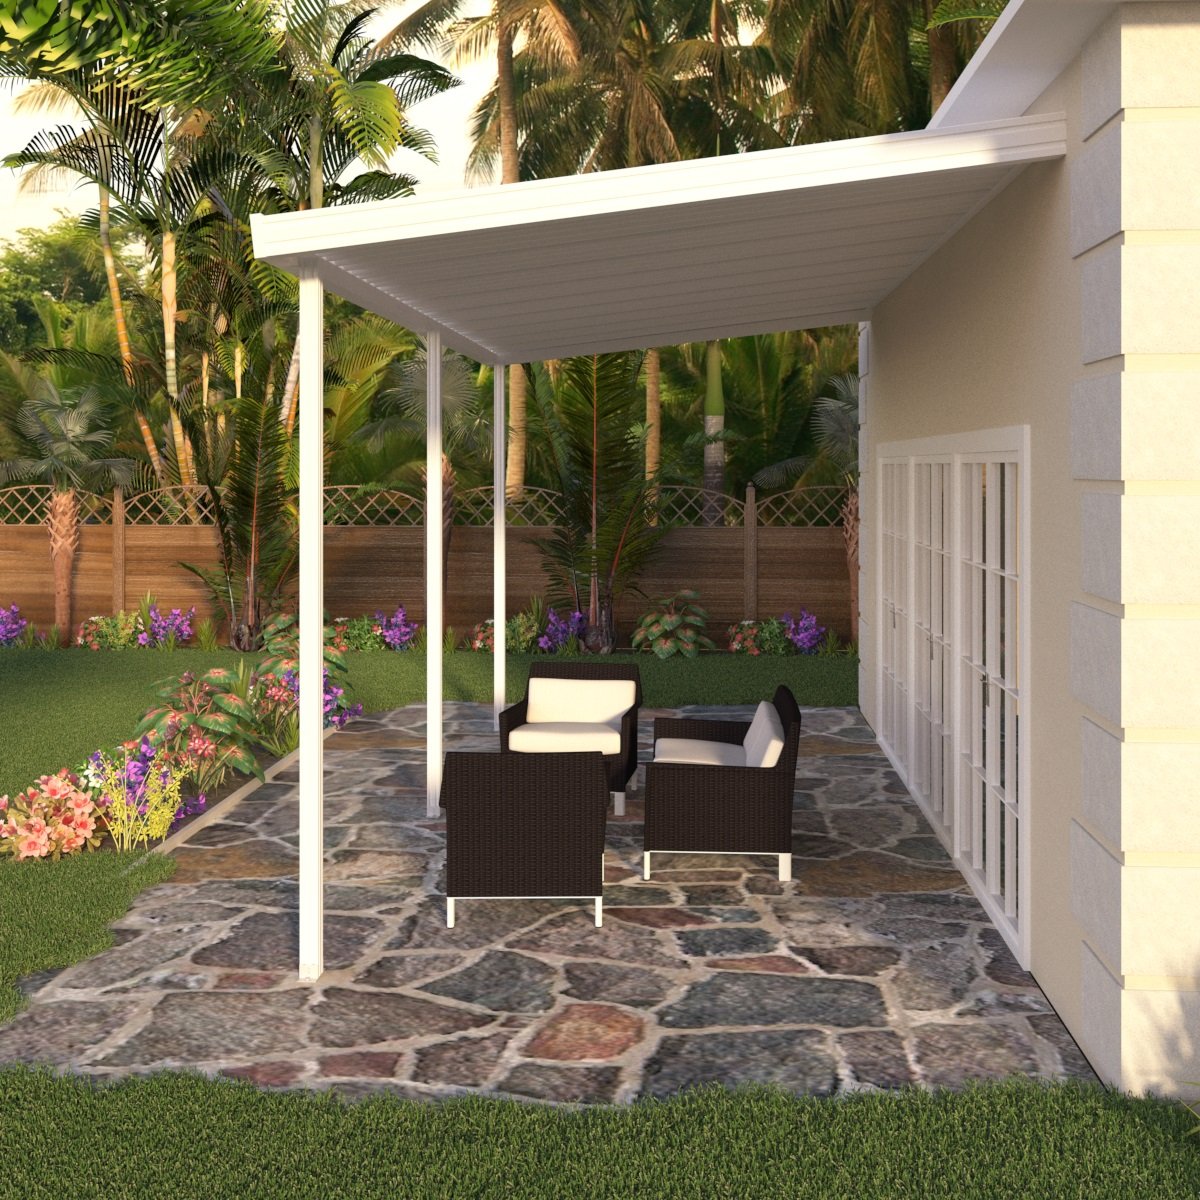 10 ft. Deep x 14 ft. Wide White Attached Aluminum Patio Cover -3 Posts - (10lb Low Snow Area)